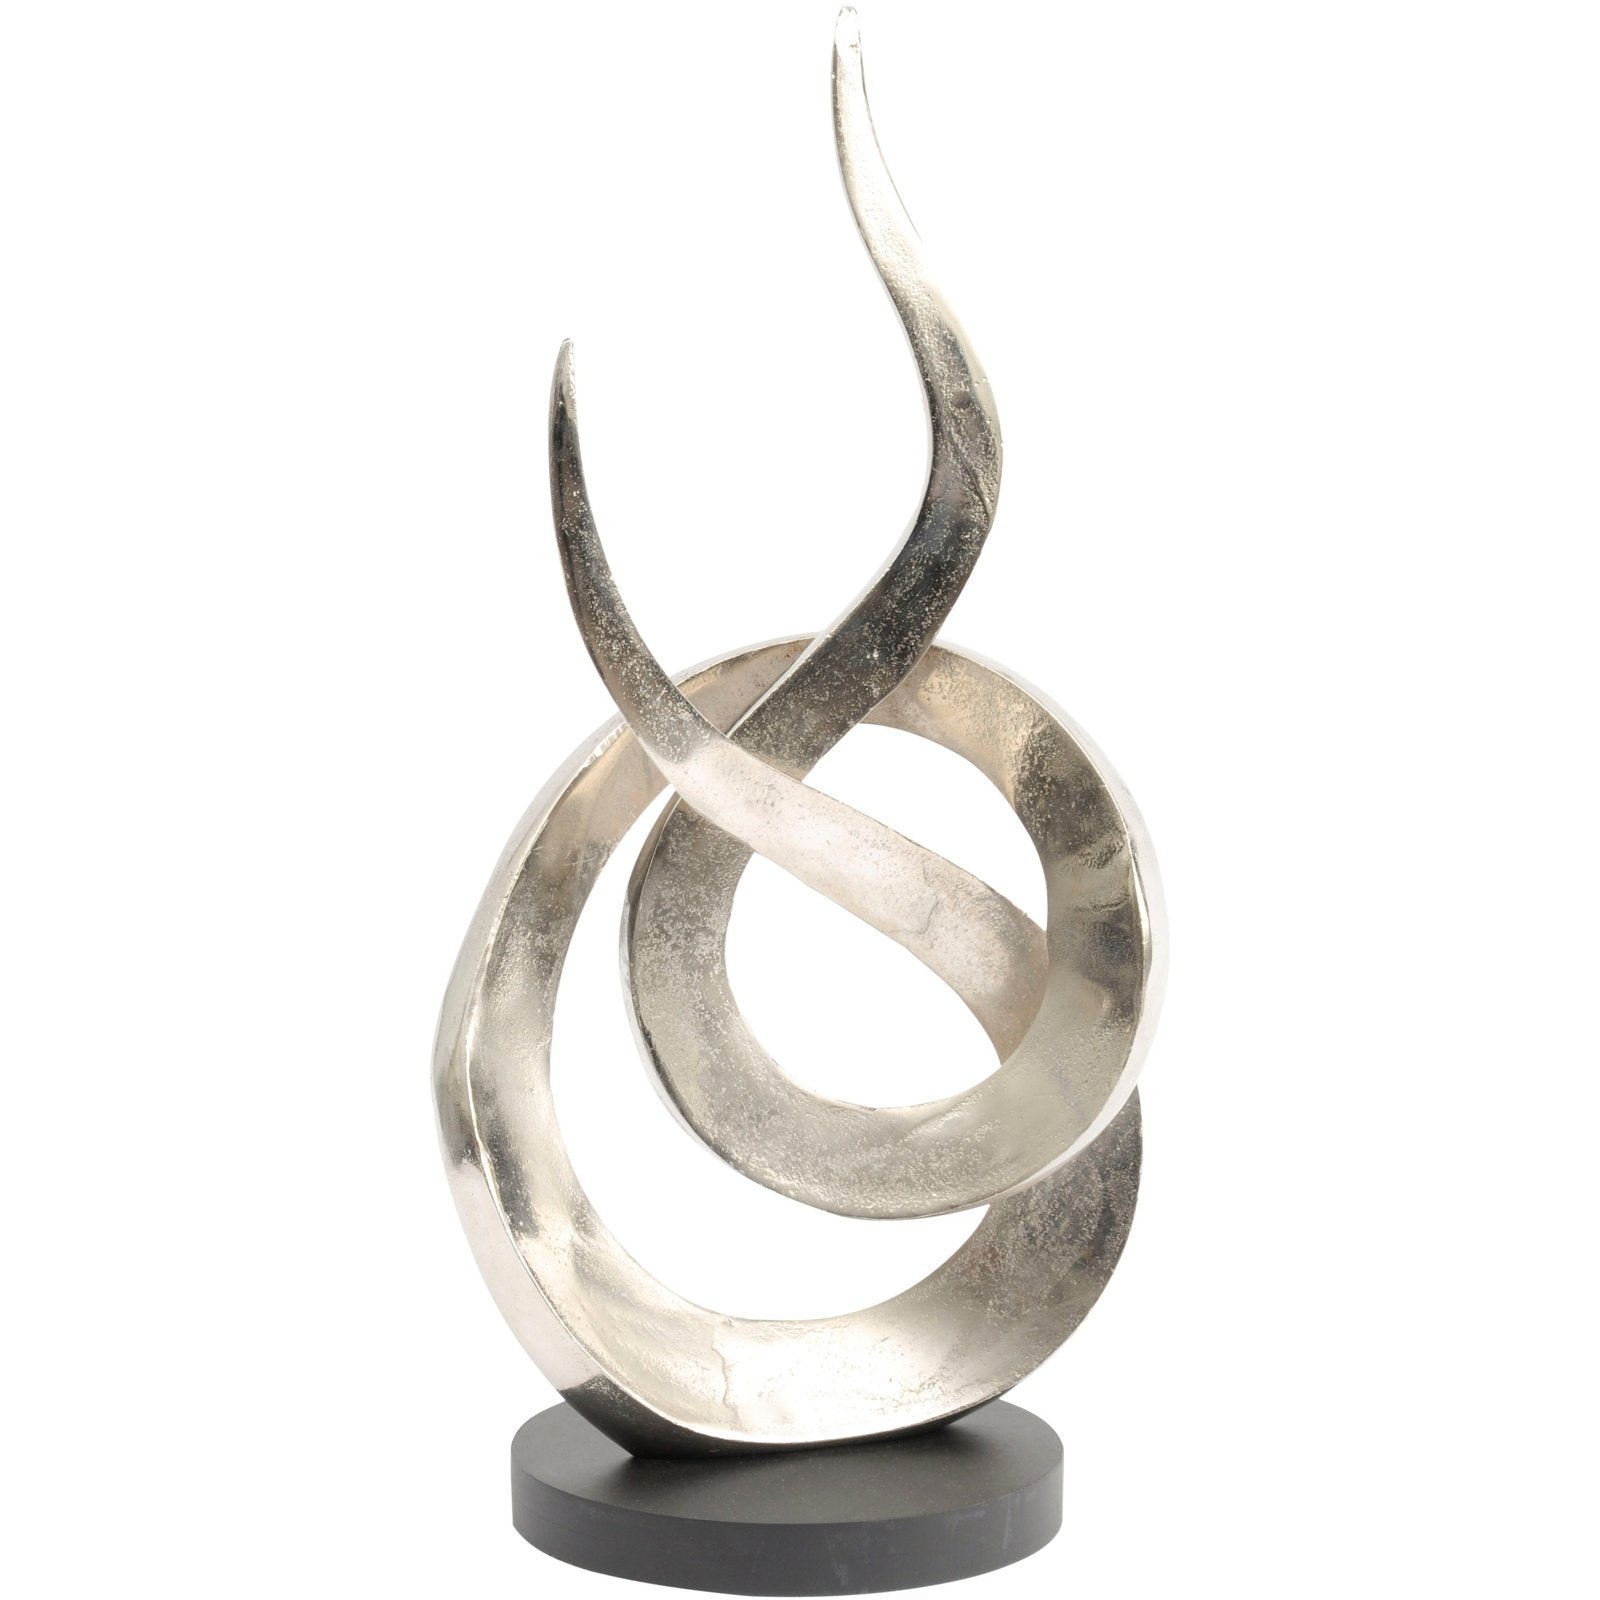 Twined Flame Silver Sculpture Large